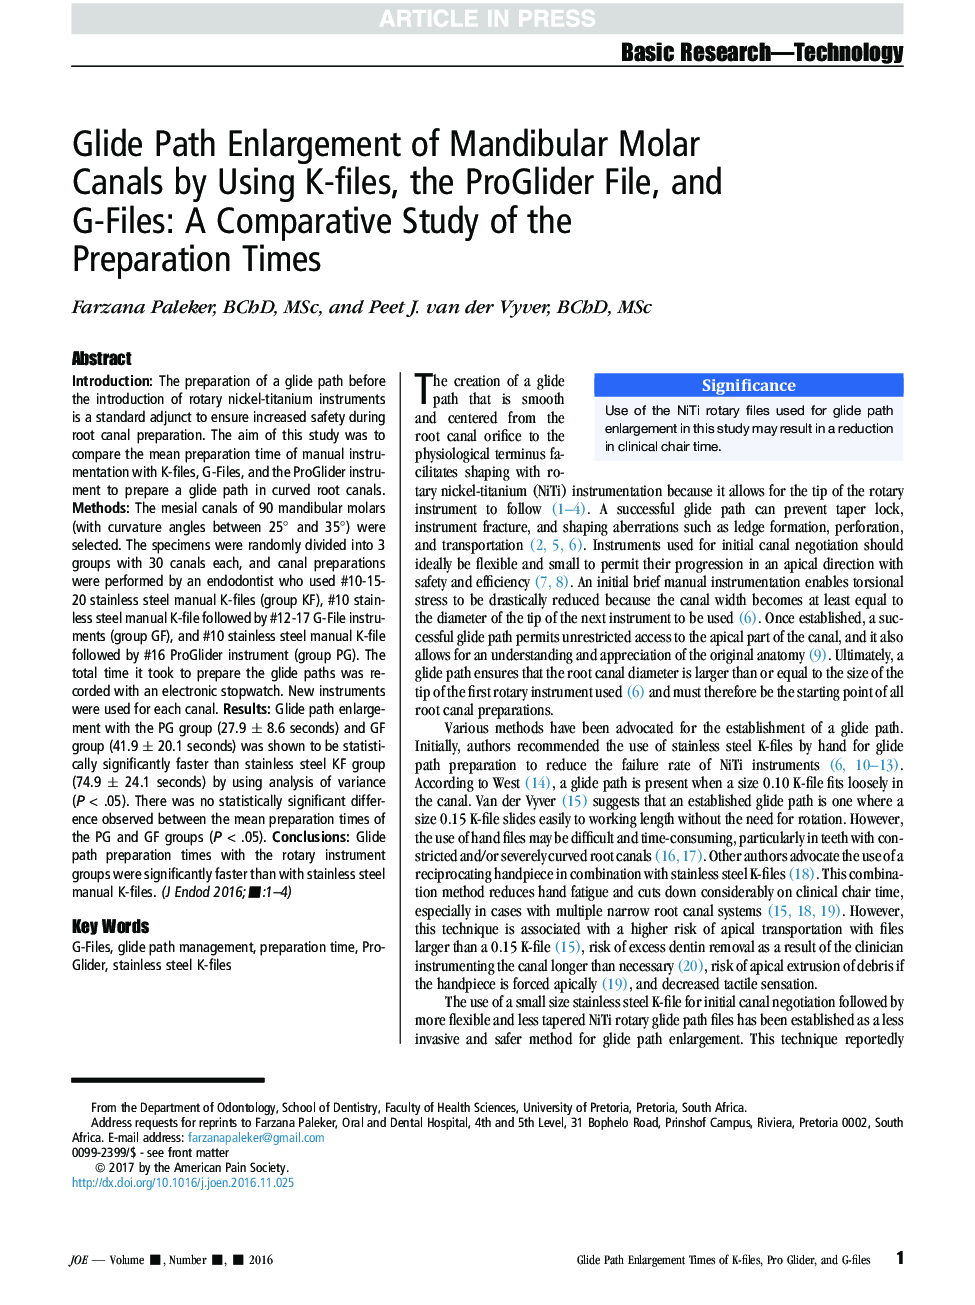 Glide Path Enlargement of Mandibular Molar Canals by Using K-files, the ProGlider File, and G-Files: A Comparative Study of the Preparation Times